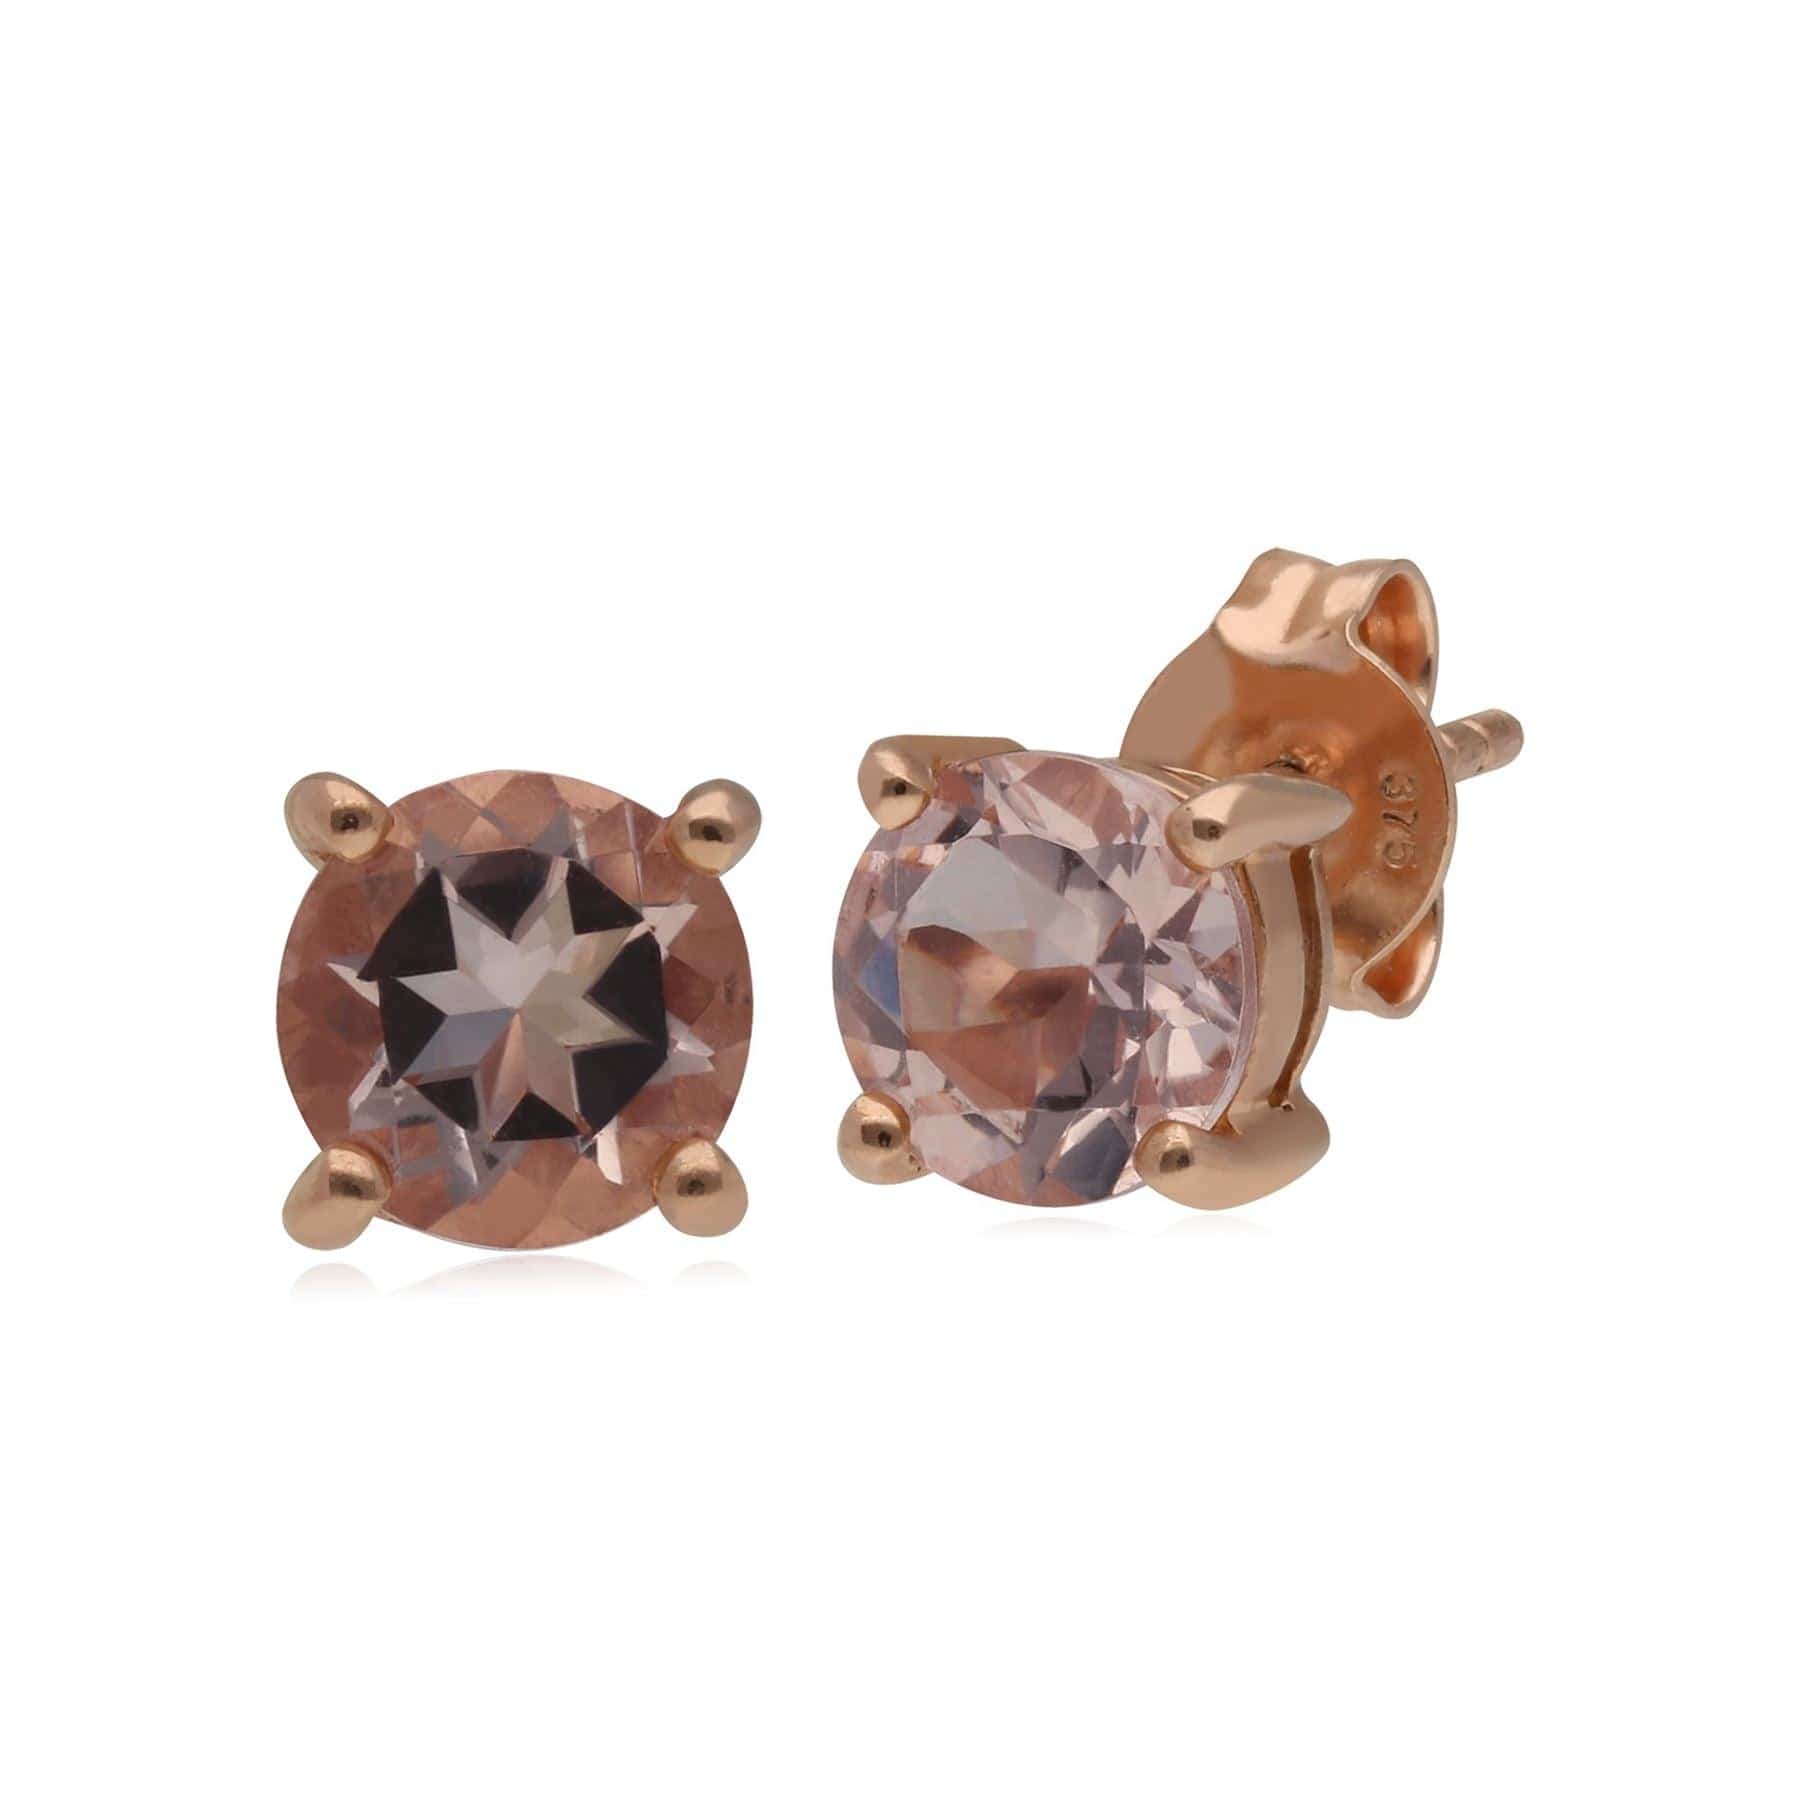 T0998E90W8 Kosmos Morganite Stud Earrings in Rose Gold Plated Sterling Silver 1